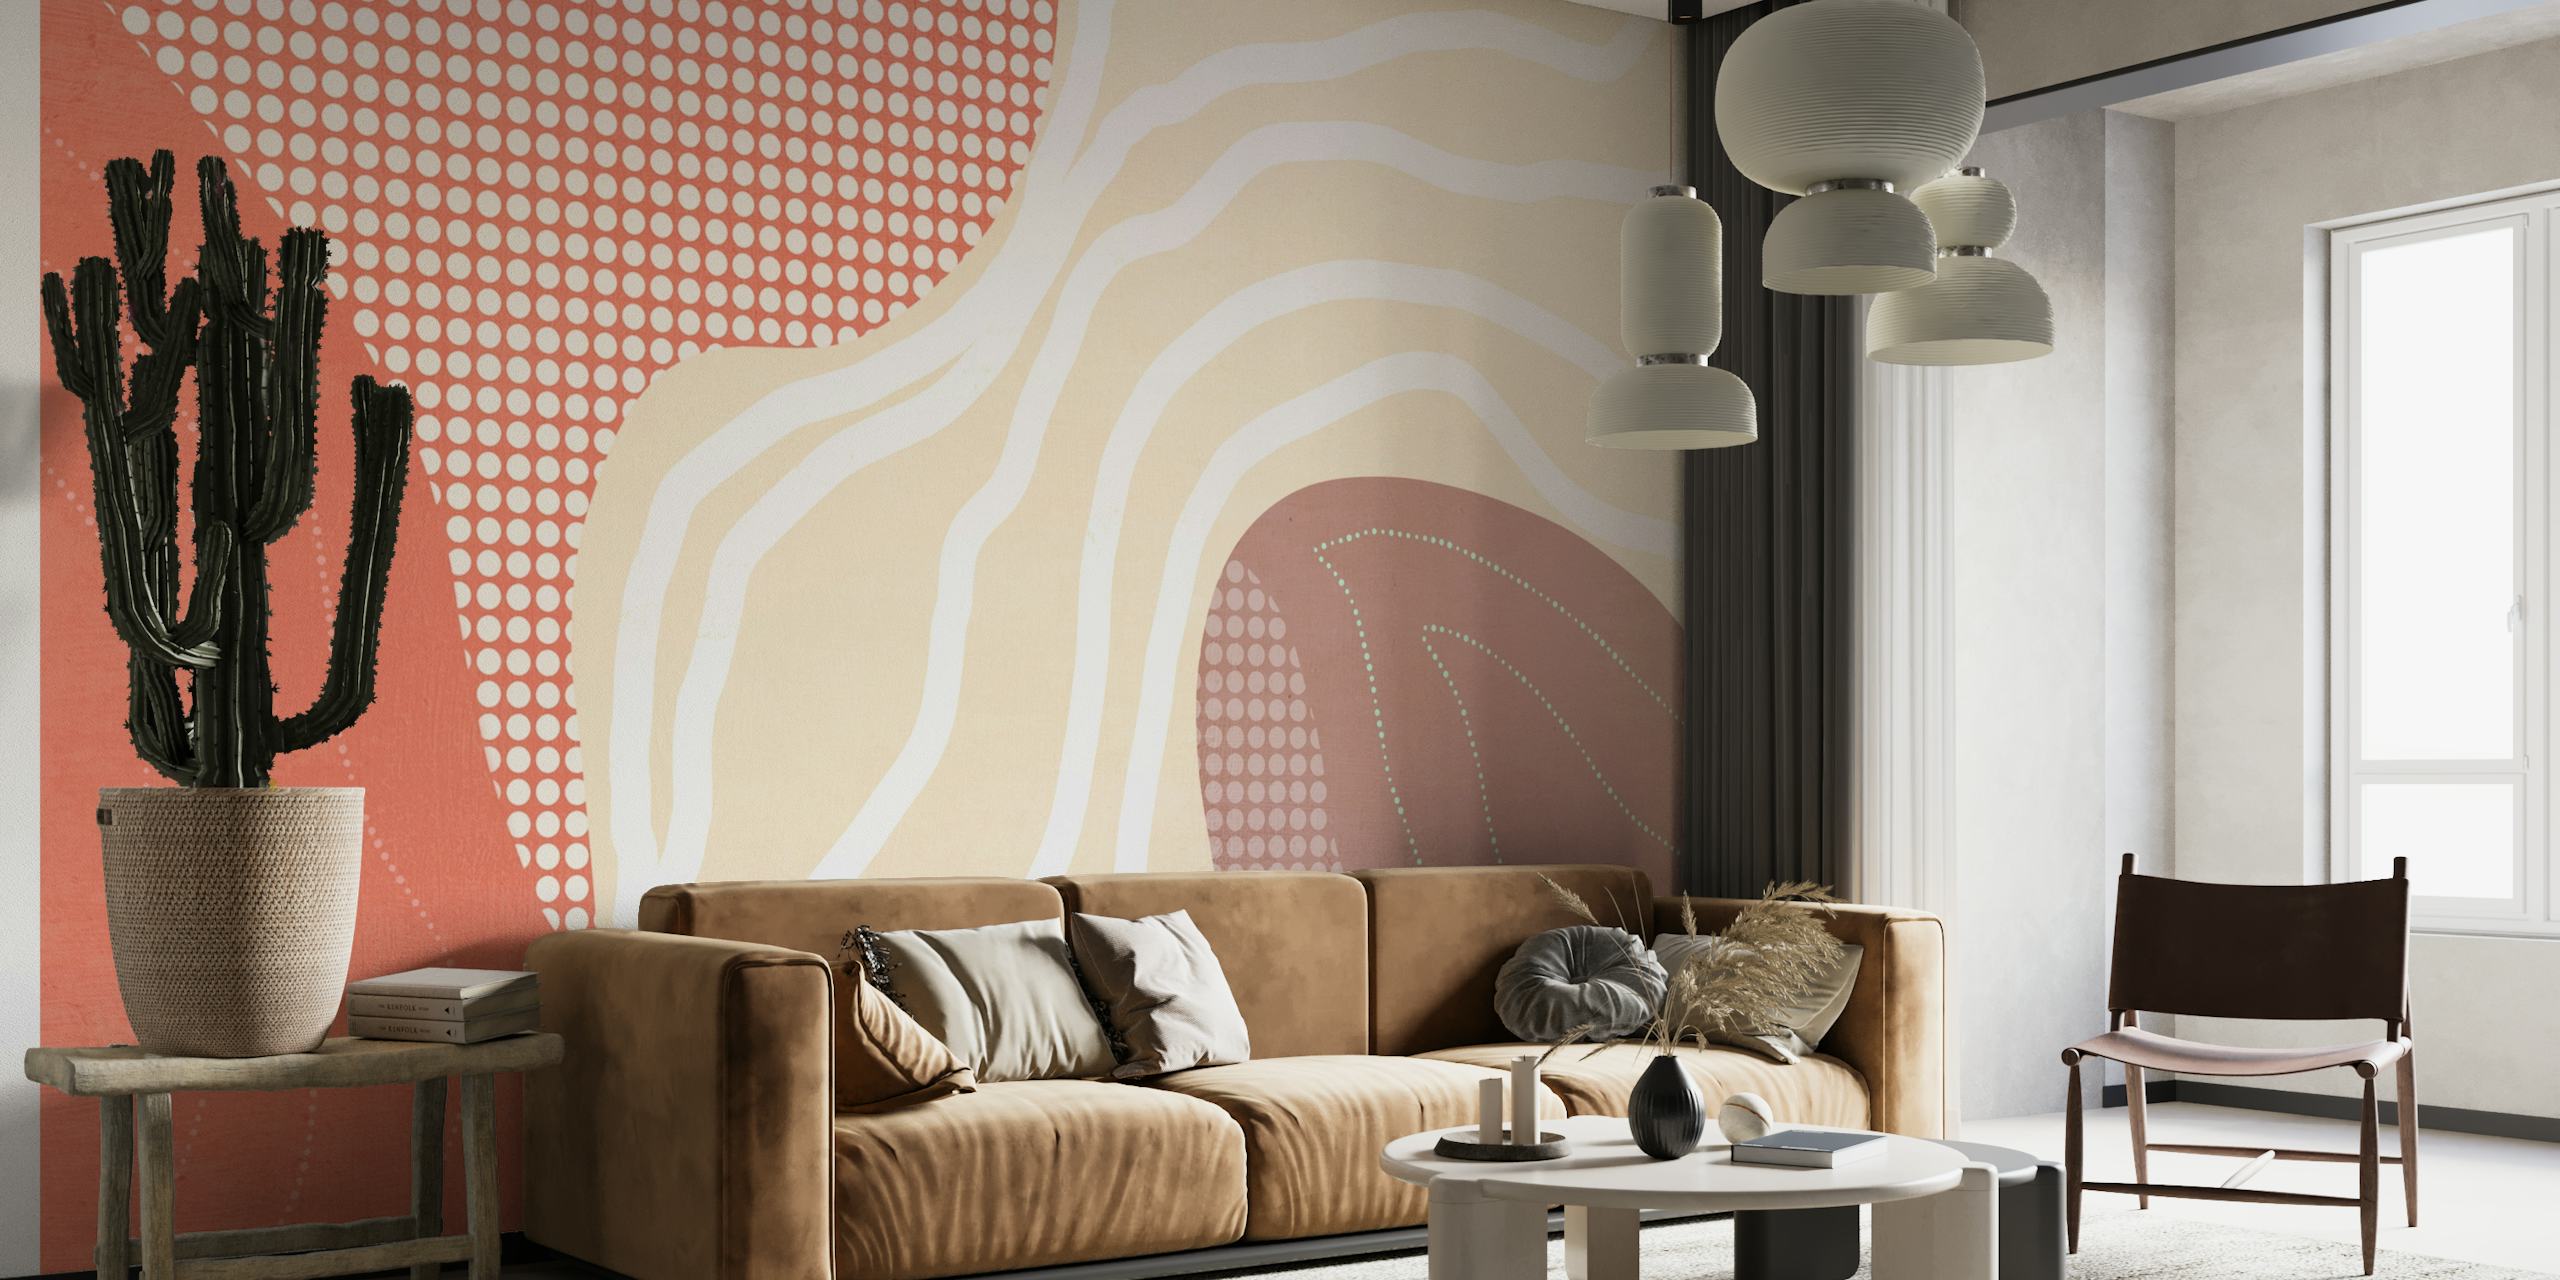 Vintage abstract wall mural with flowing curves and muted earth tones